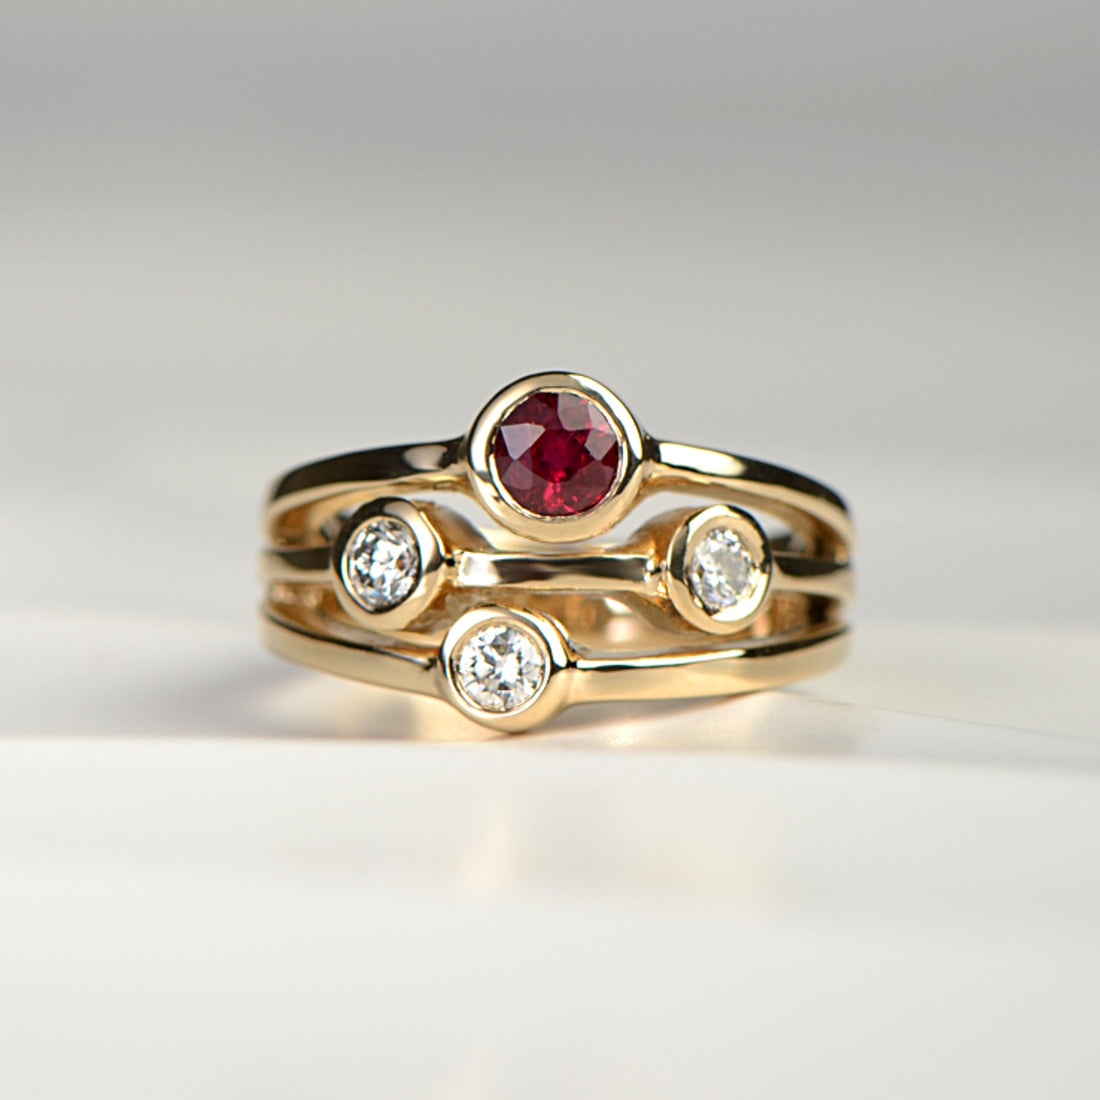 Contemporary ruby and diamond ring